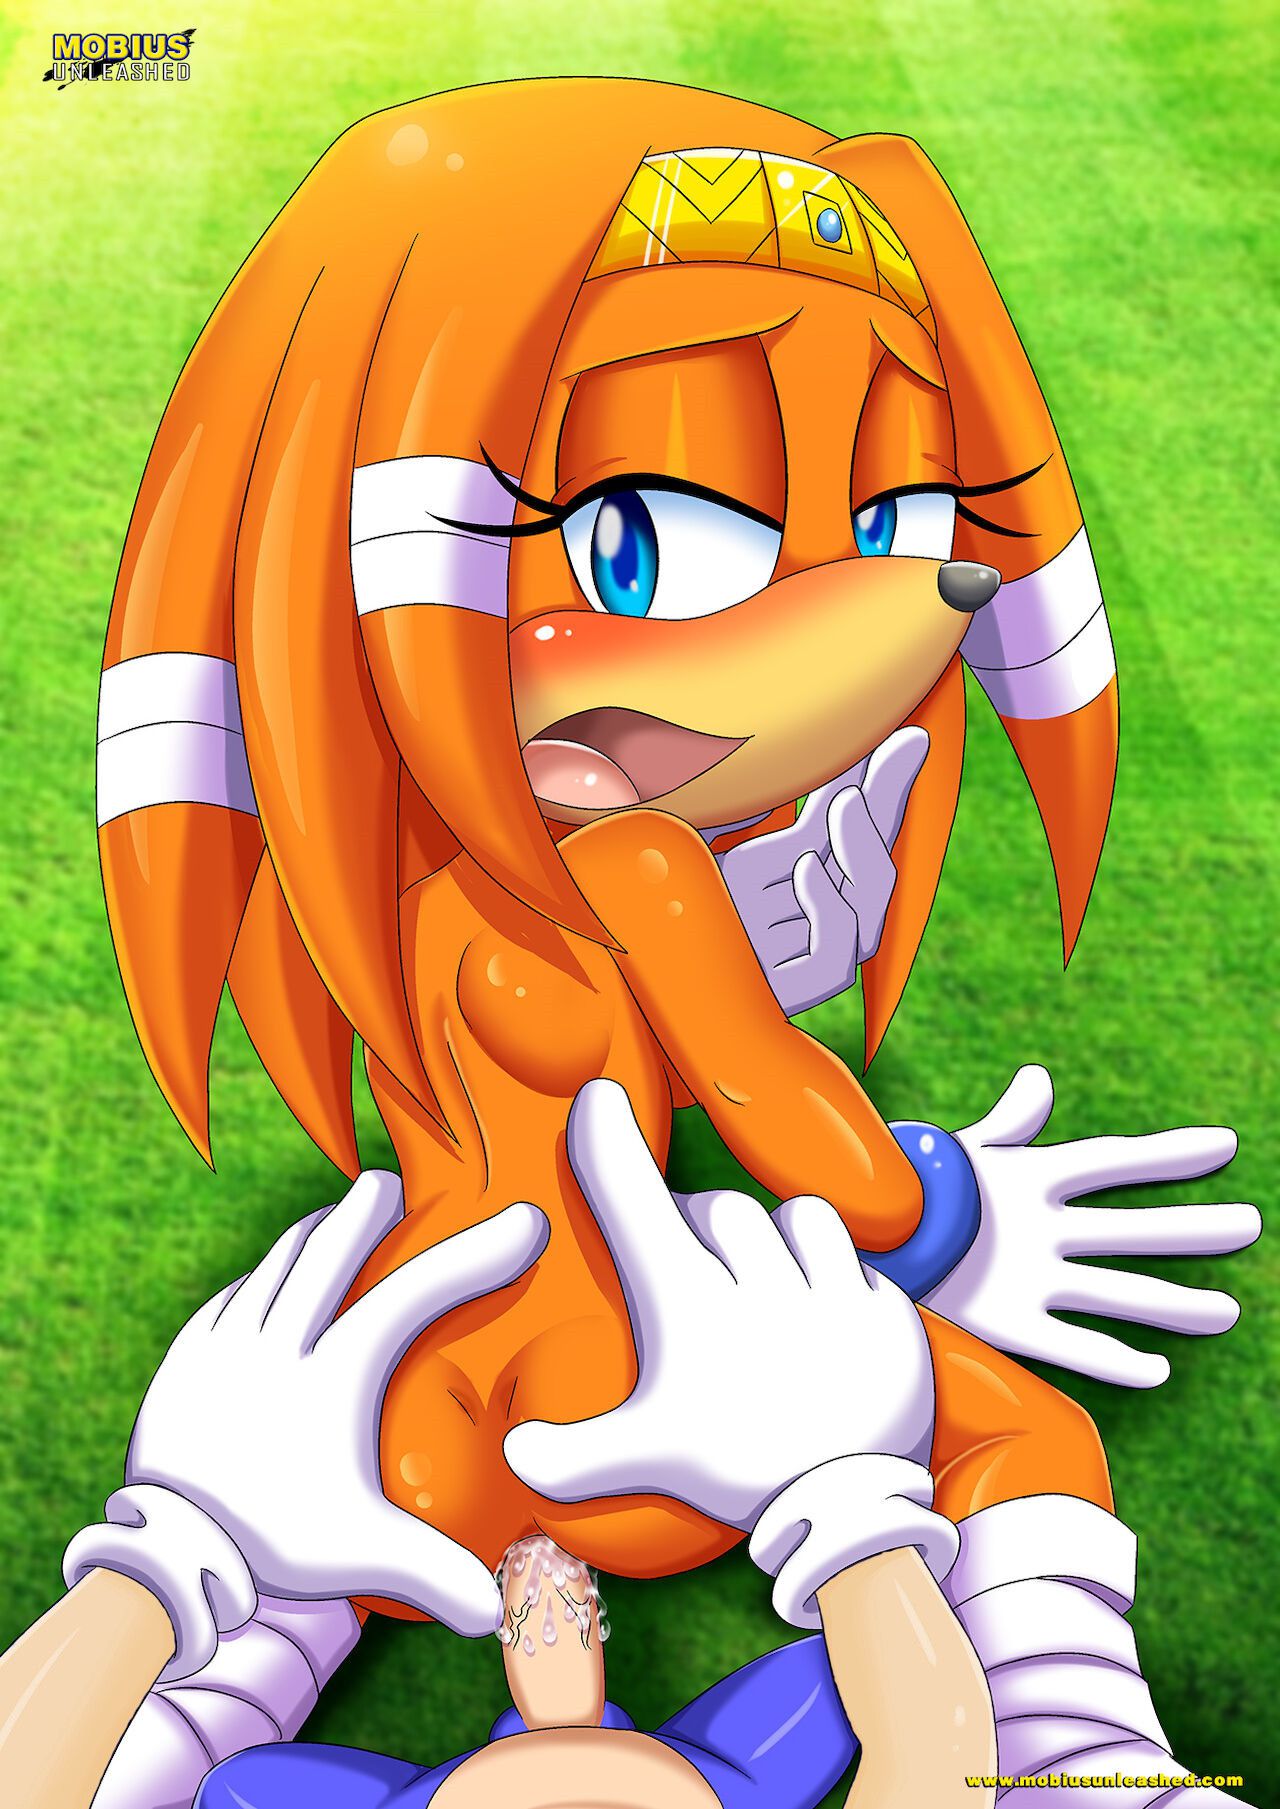 Mobius Unleashed: Tikal the Echidna 74